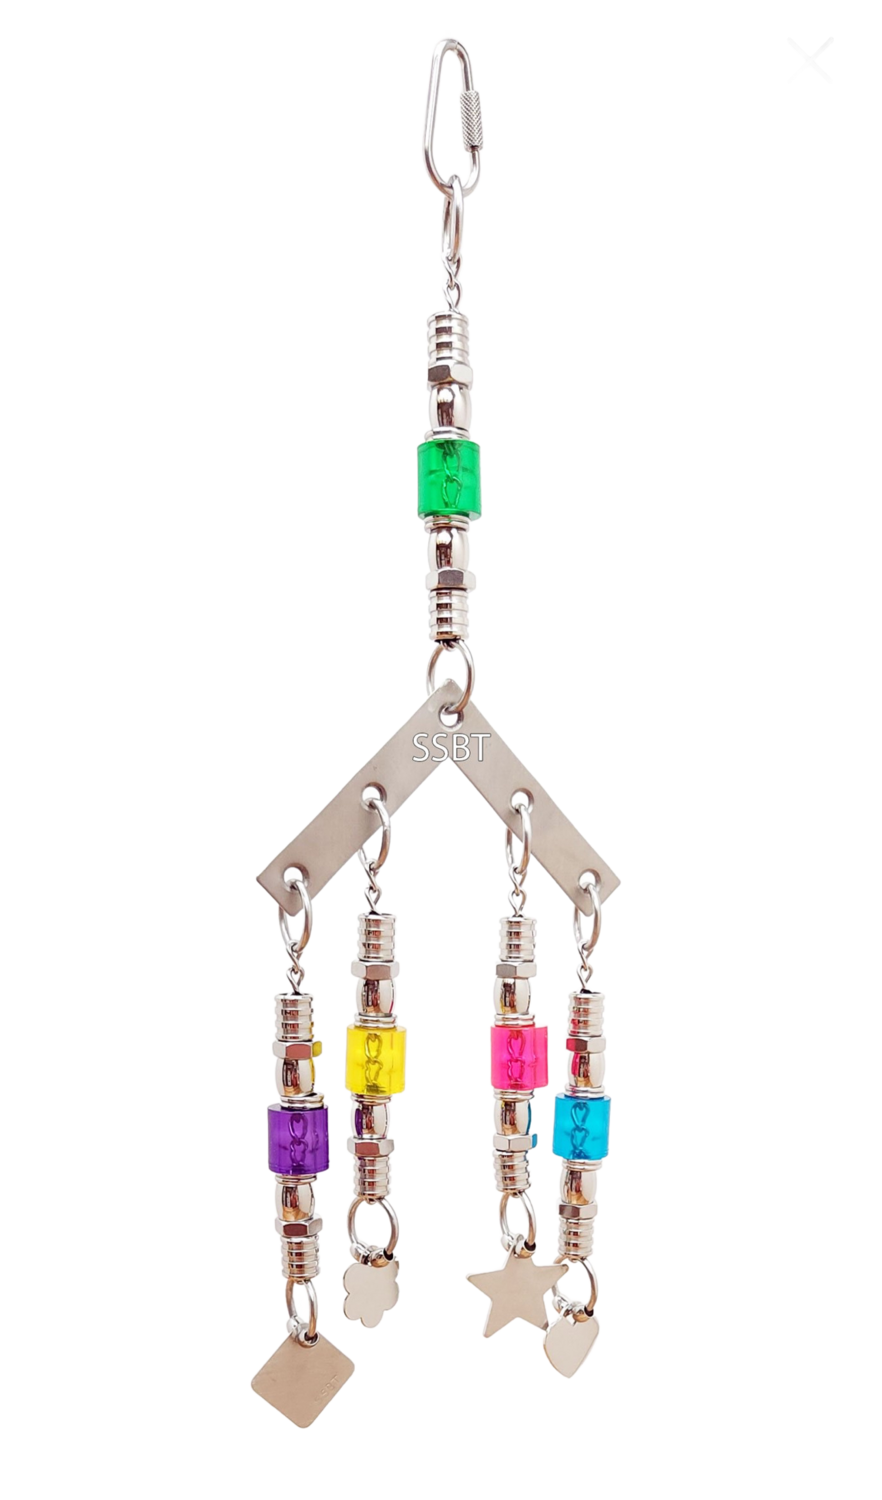 Dangling Dodads - Stainless Steel - Hand made in the USA